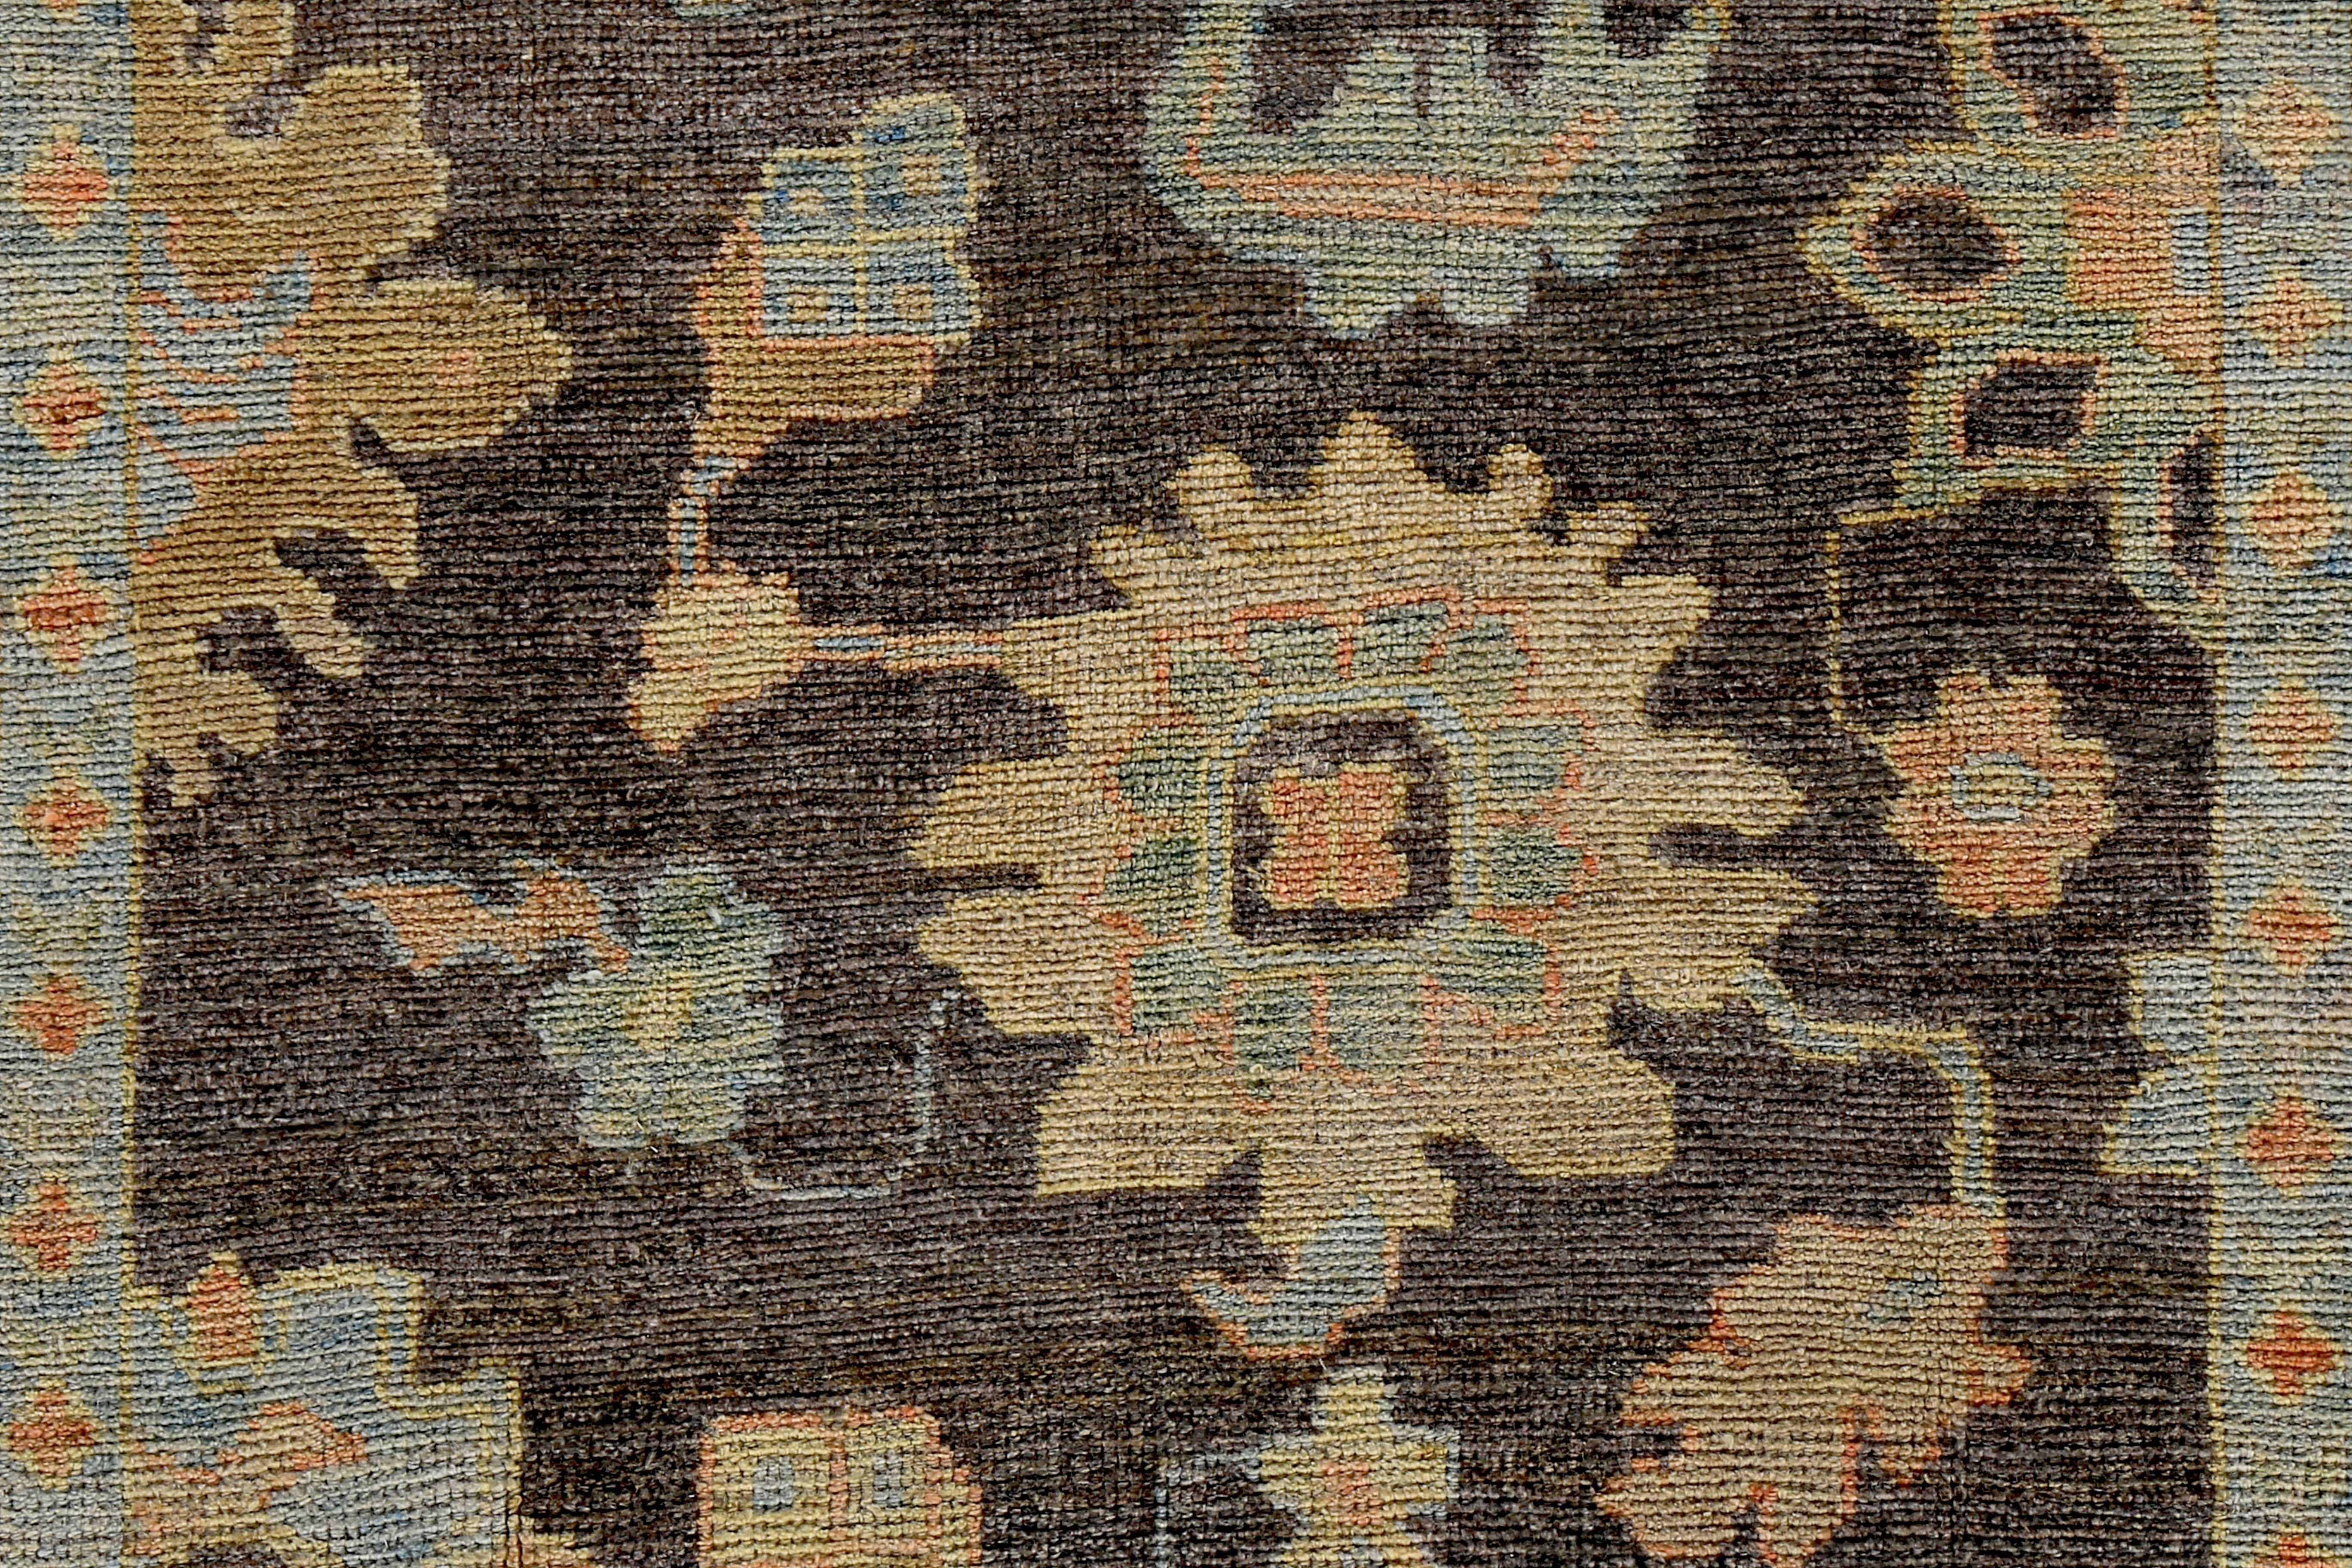 Hand-Woven Turkish Oushak Rug with Blue and Beige Flower Patterns on Brown Field For Sale